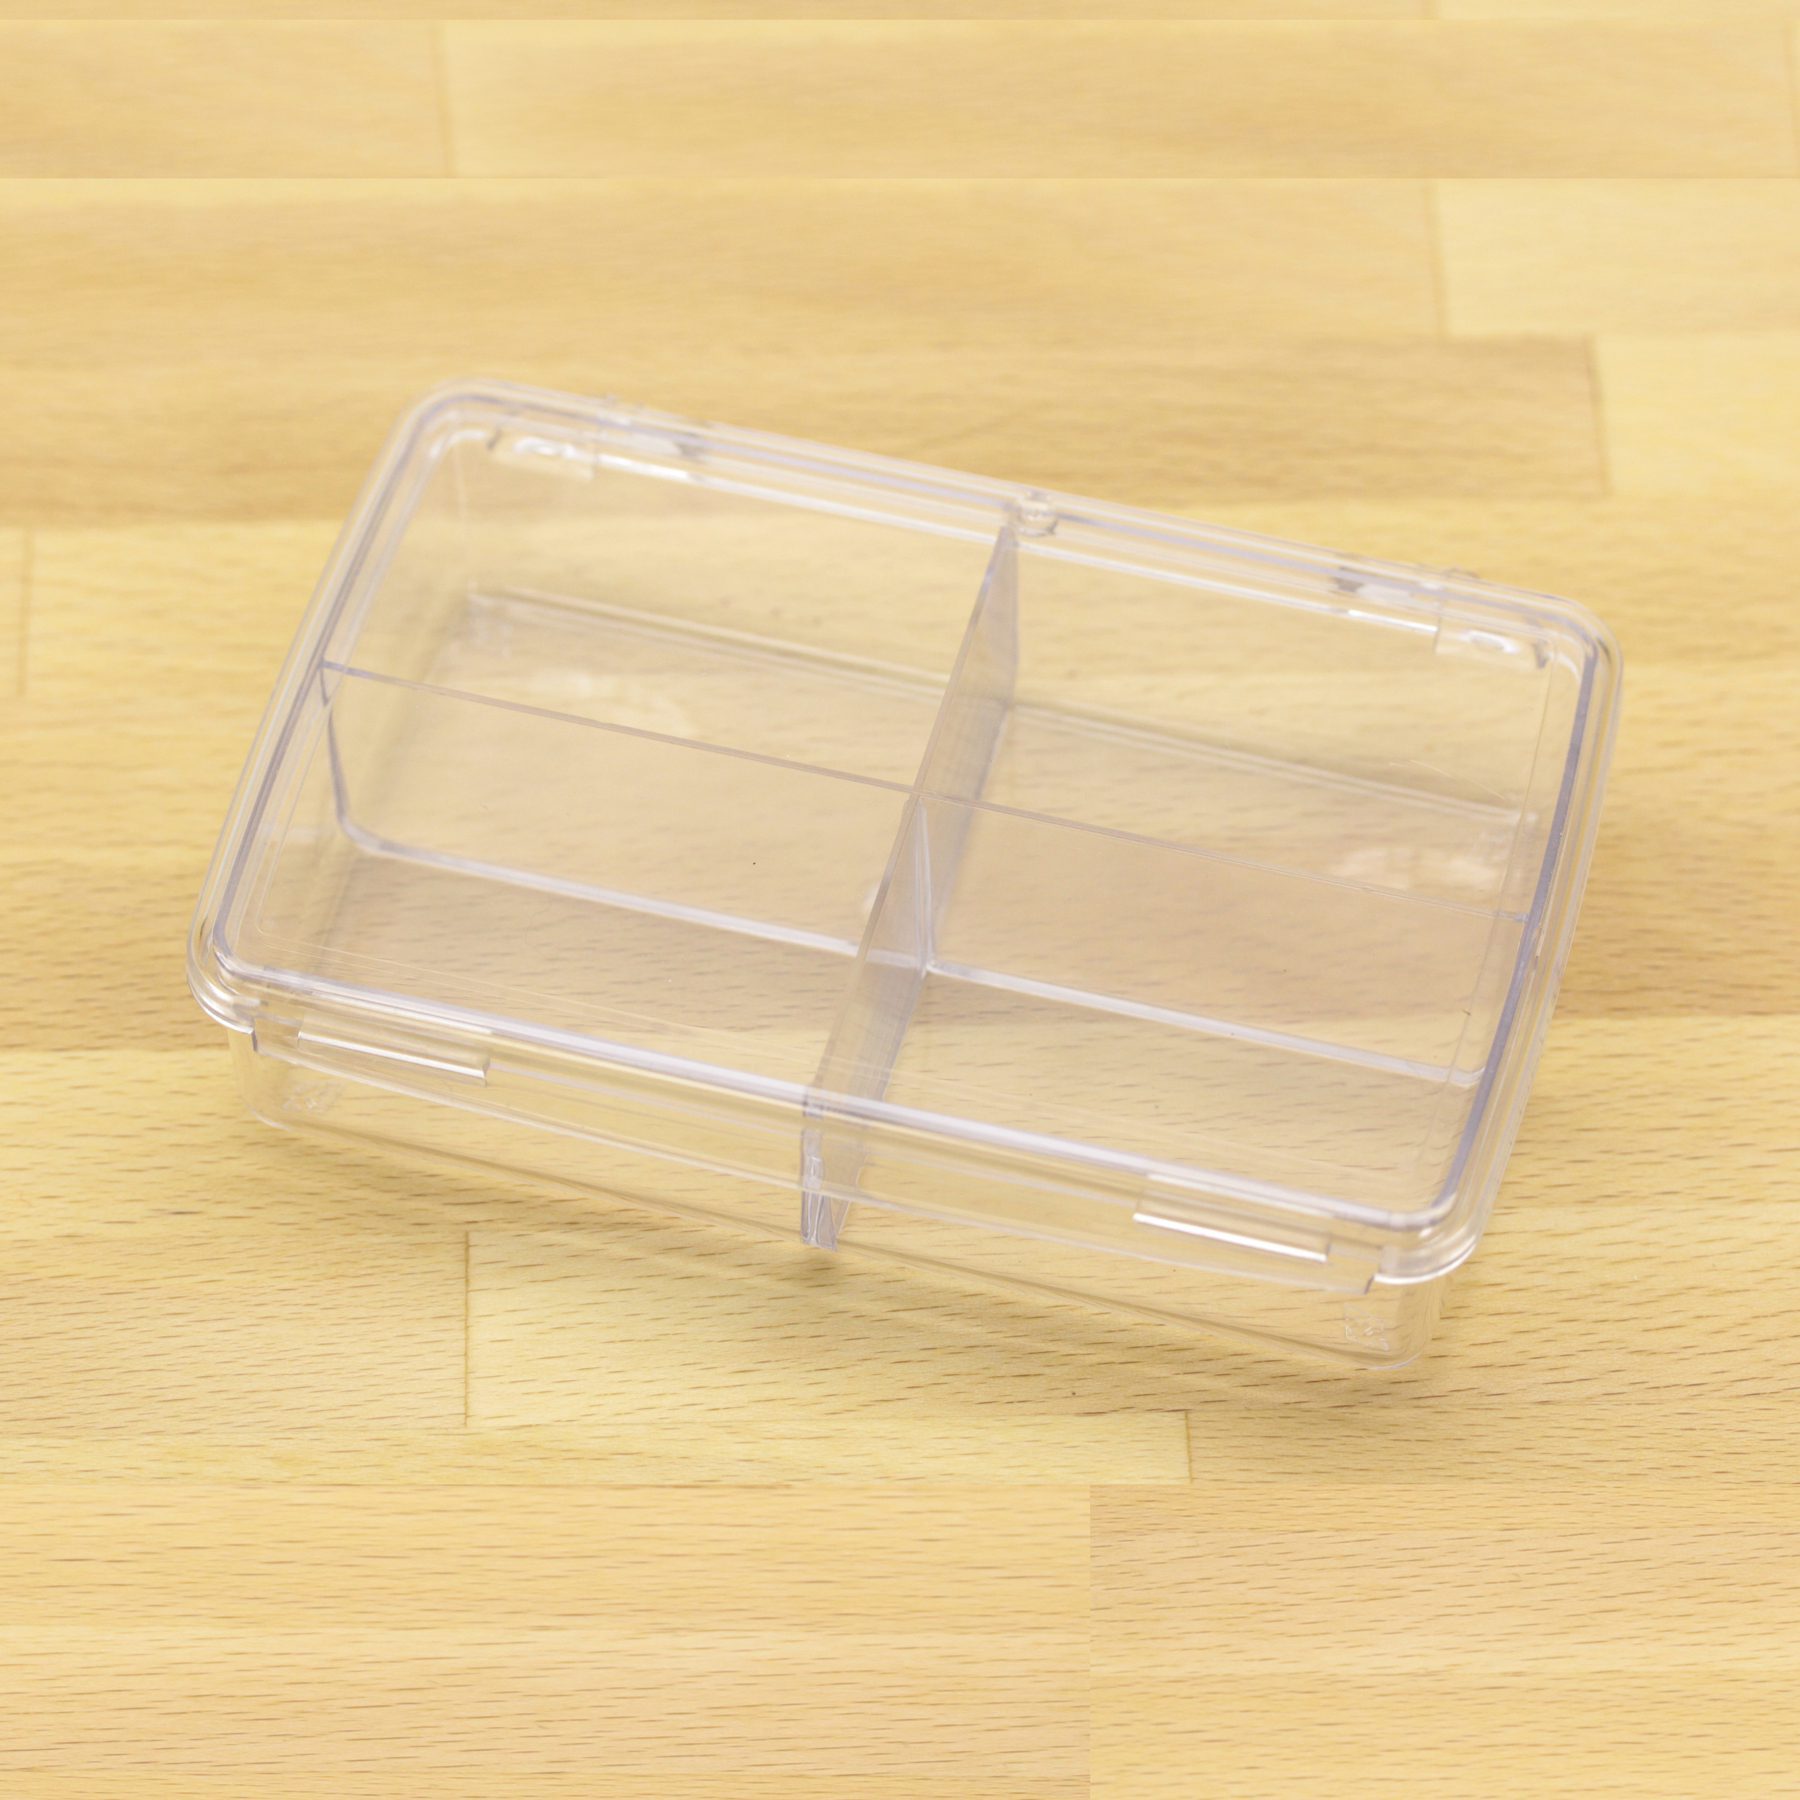 Buy Plastic Boxes Online at $4.10 - JL Smith & Co